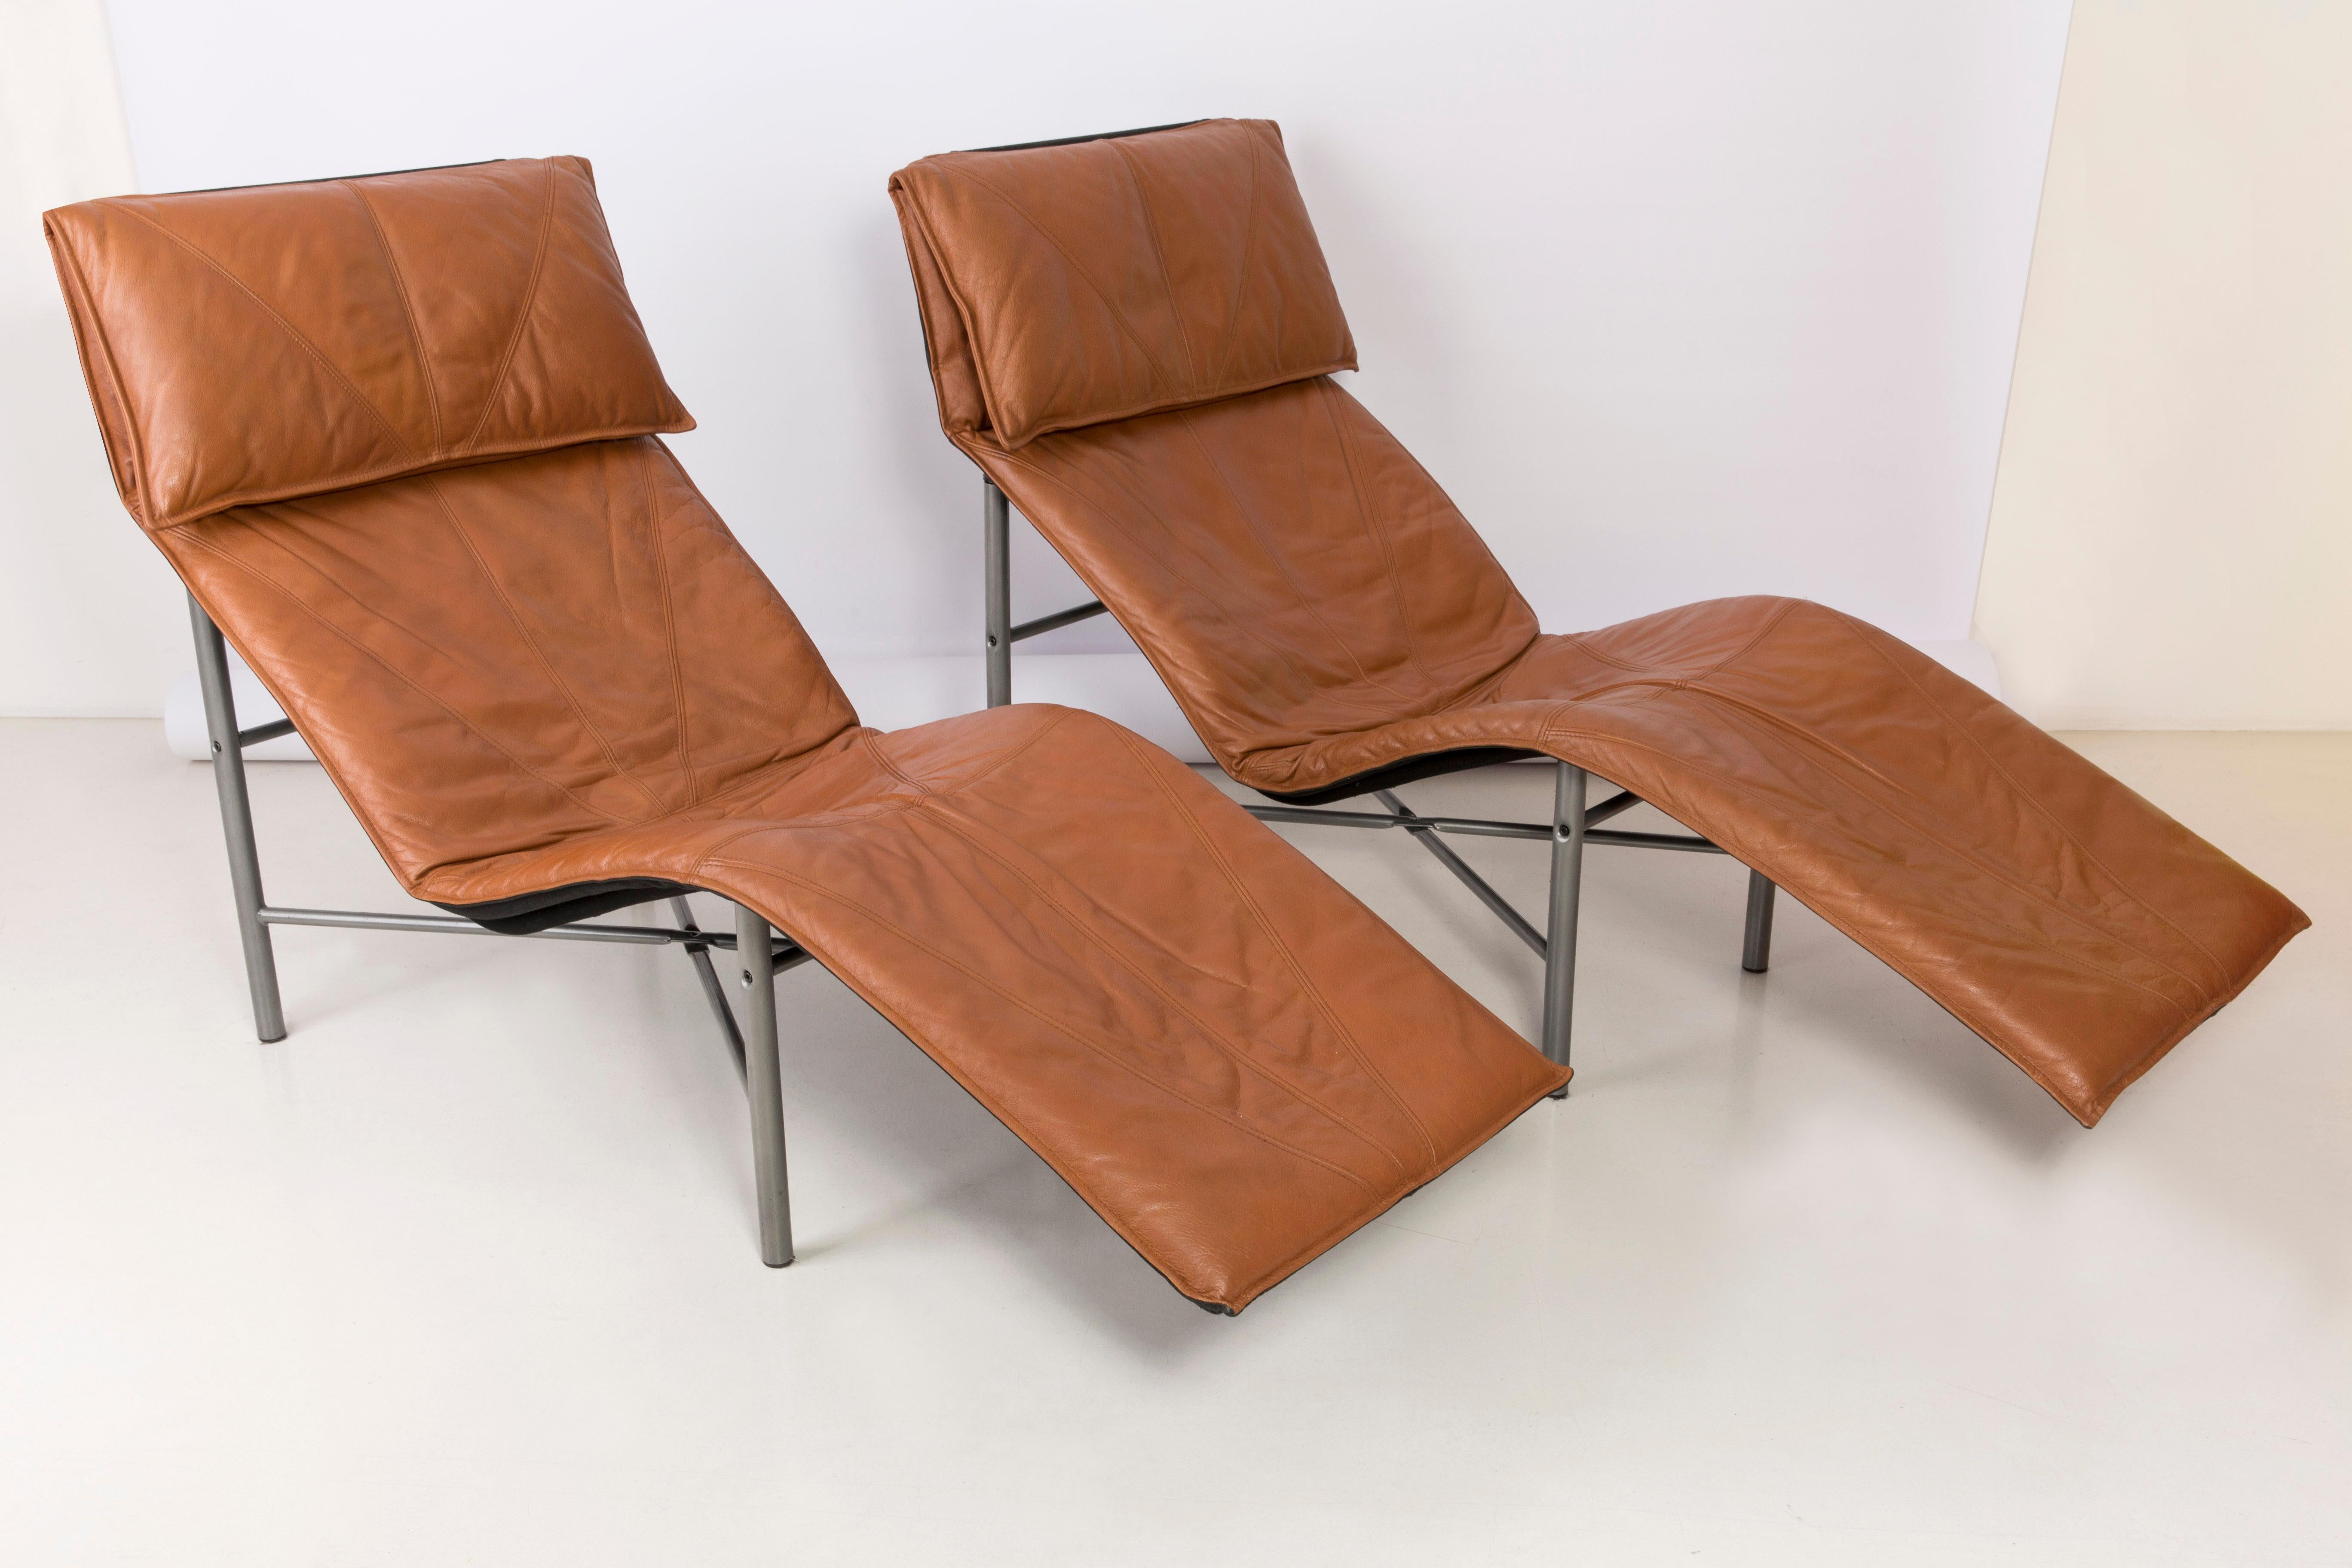 Midcentury Danish Modern Brown Leather Chaise Lounge Chair by Tord Björklund For Sale 2